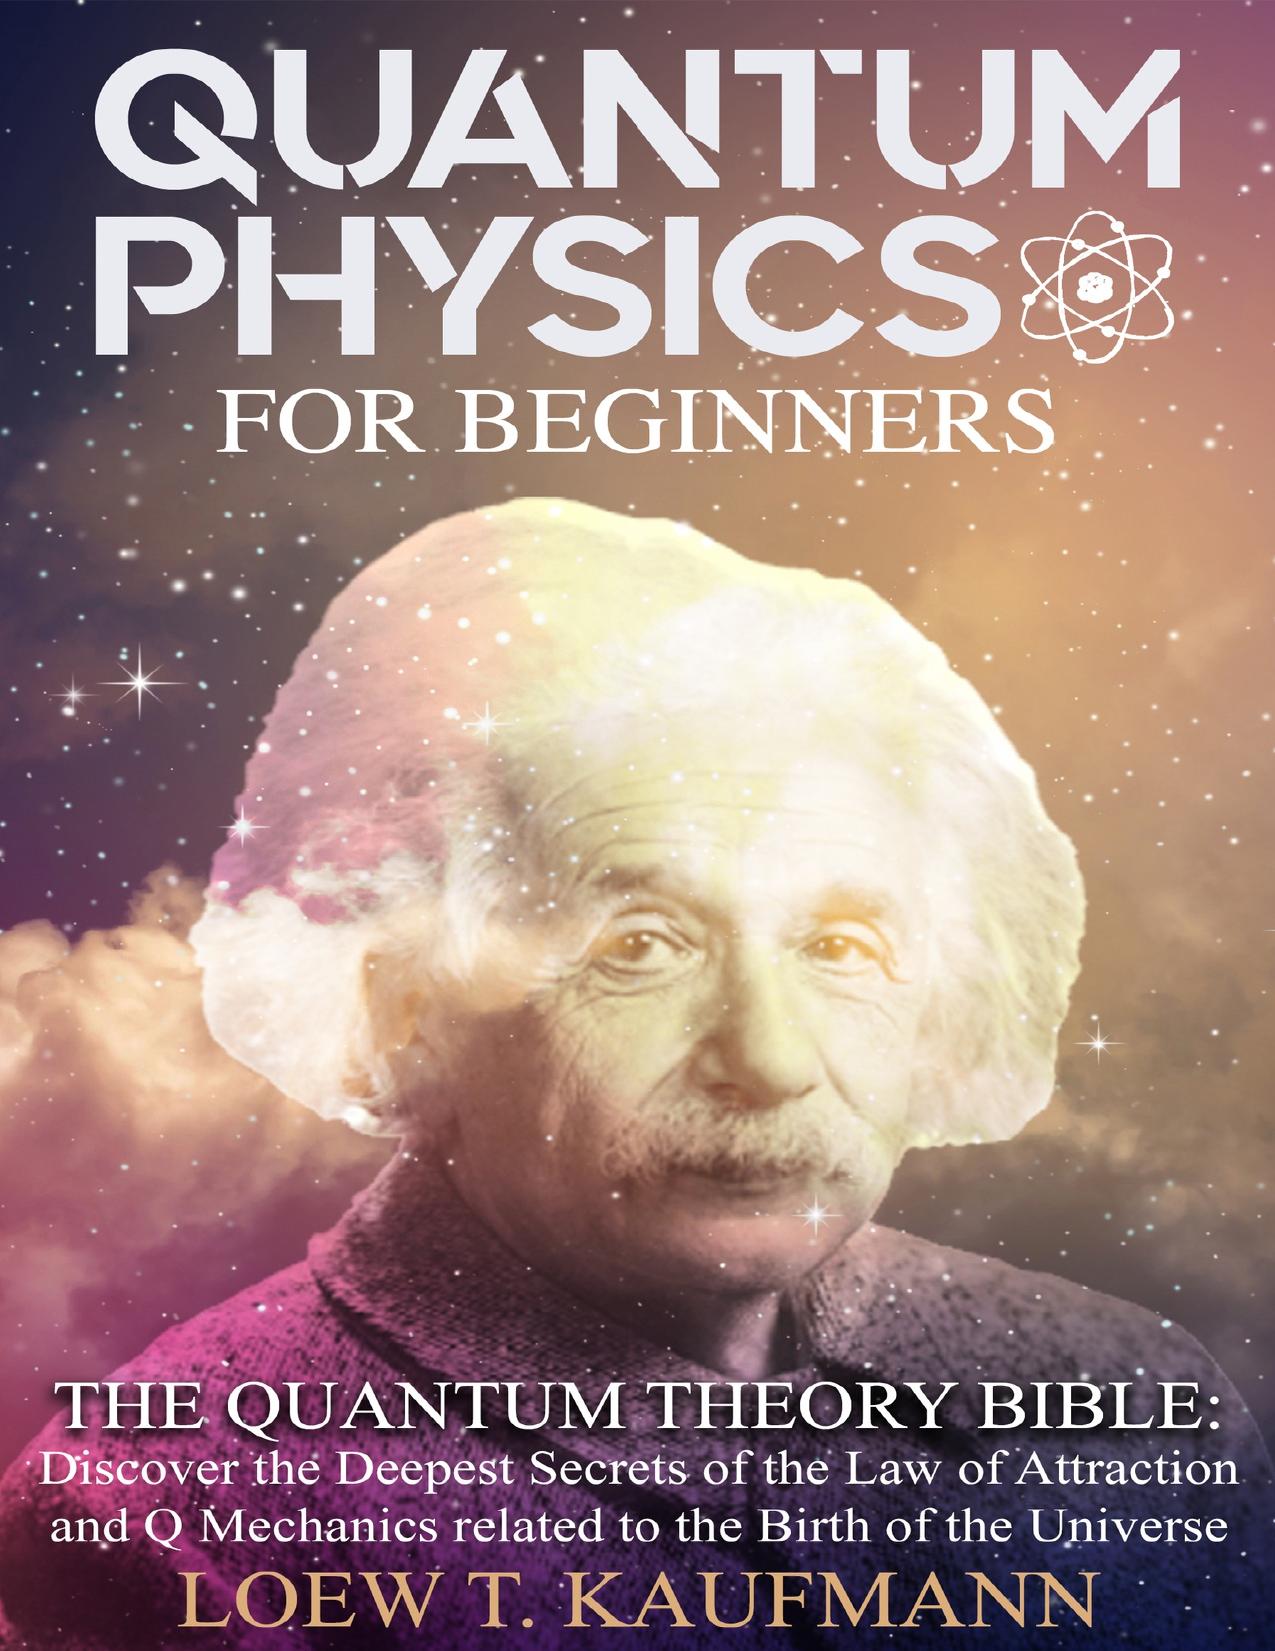 Quantum Physics for Beginners: The Quantum Theory Bible : Discover the Deepest Secrets of the Law of Attraction and Q Mechanics Related to the Birth of the Universe by Kaufmann Loew T